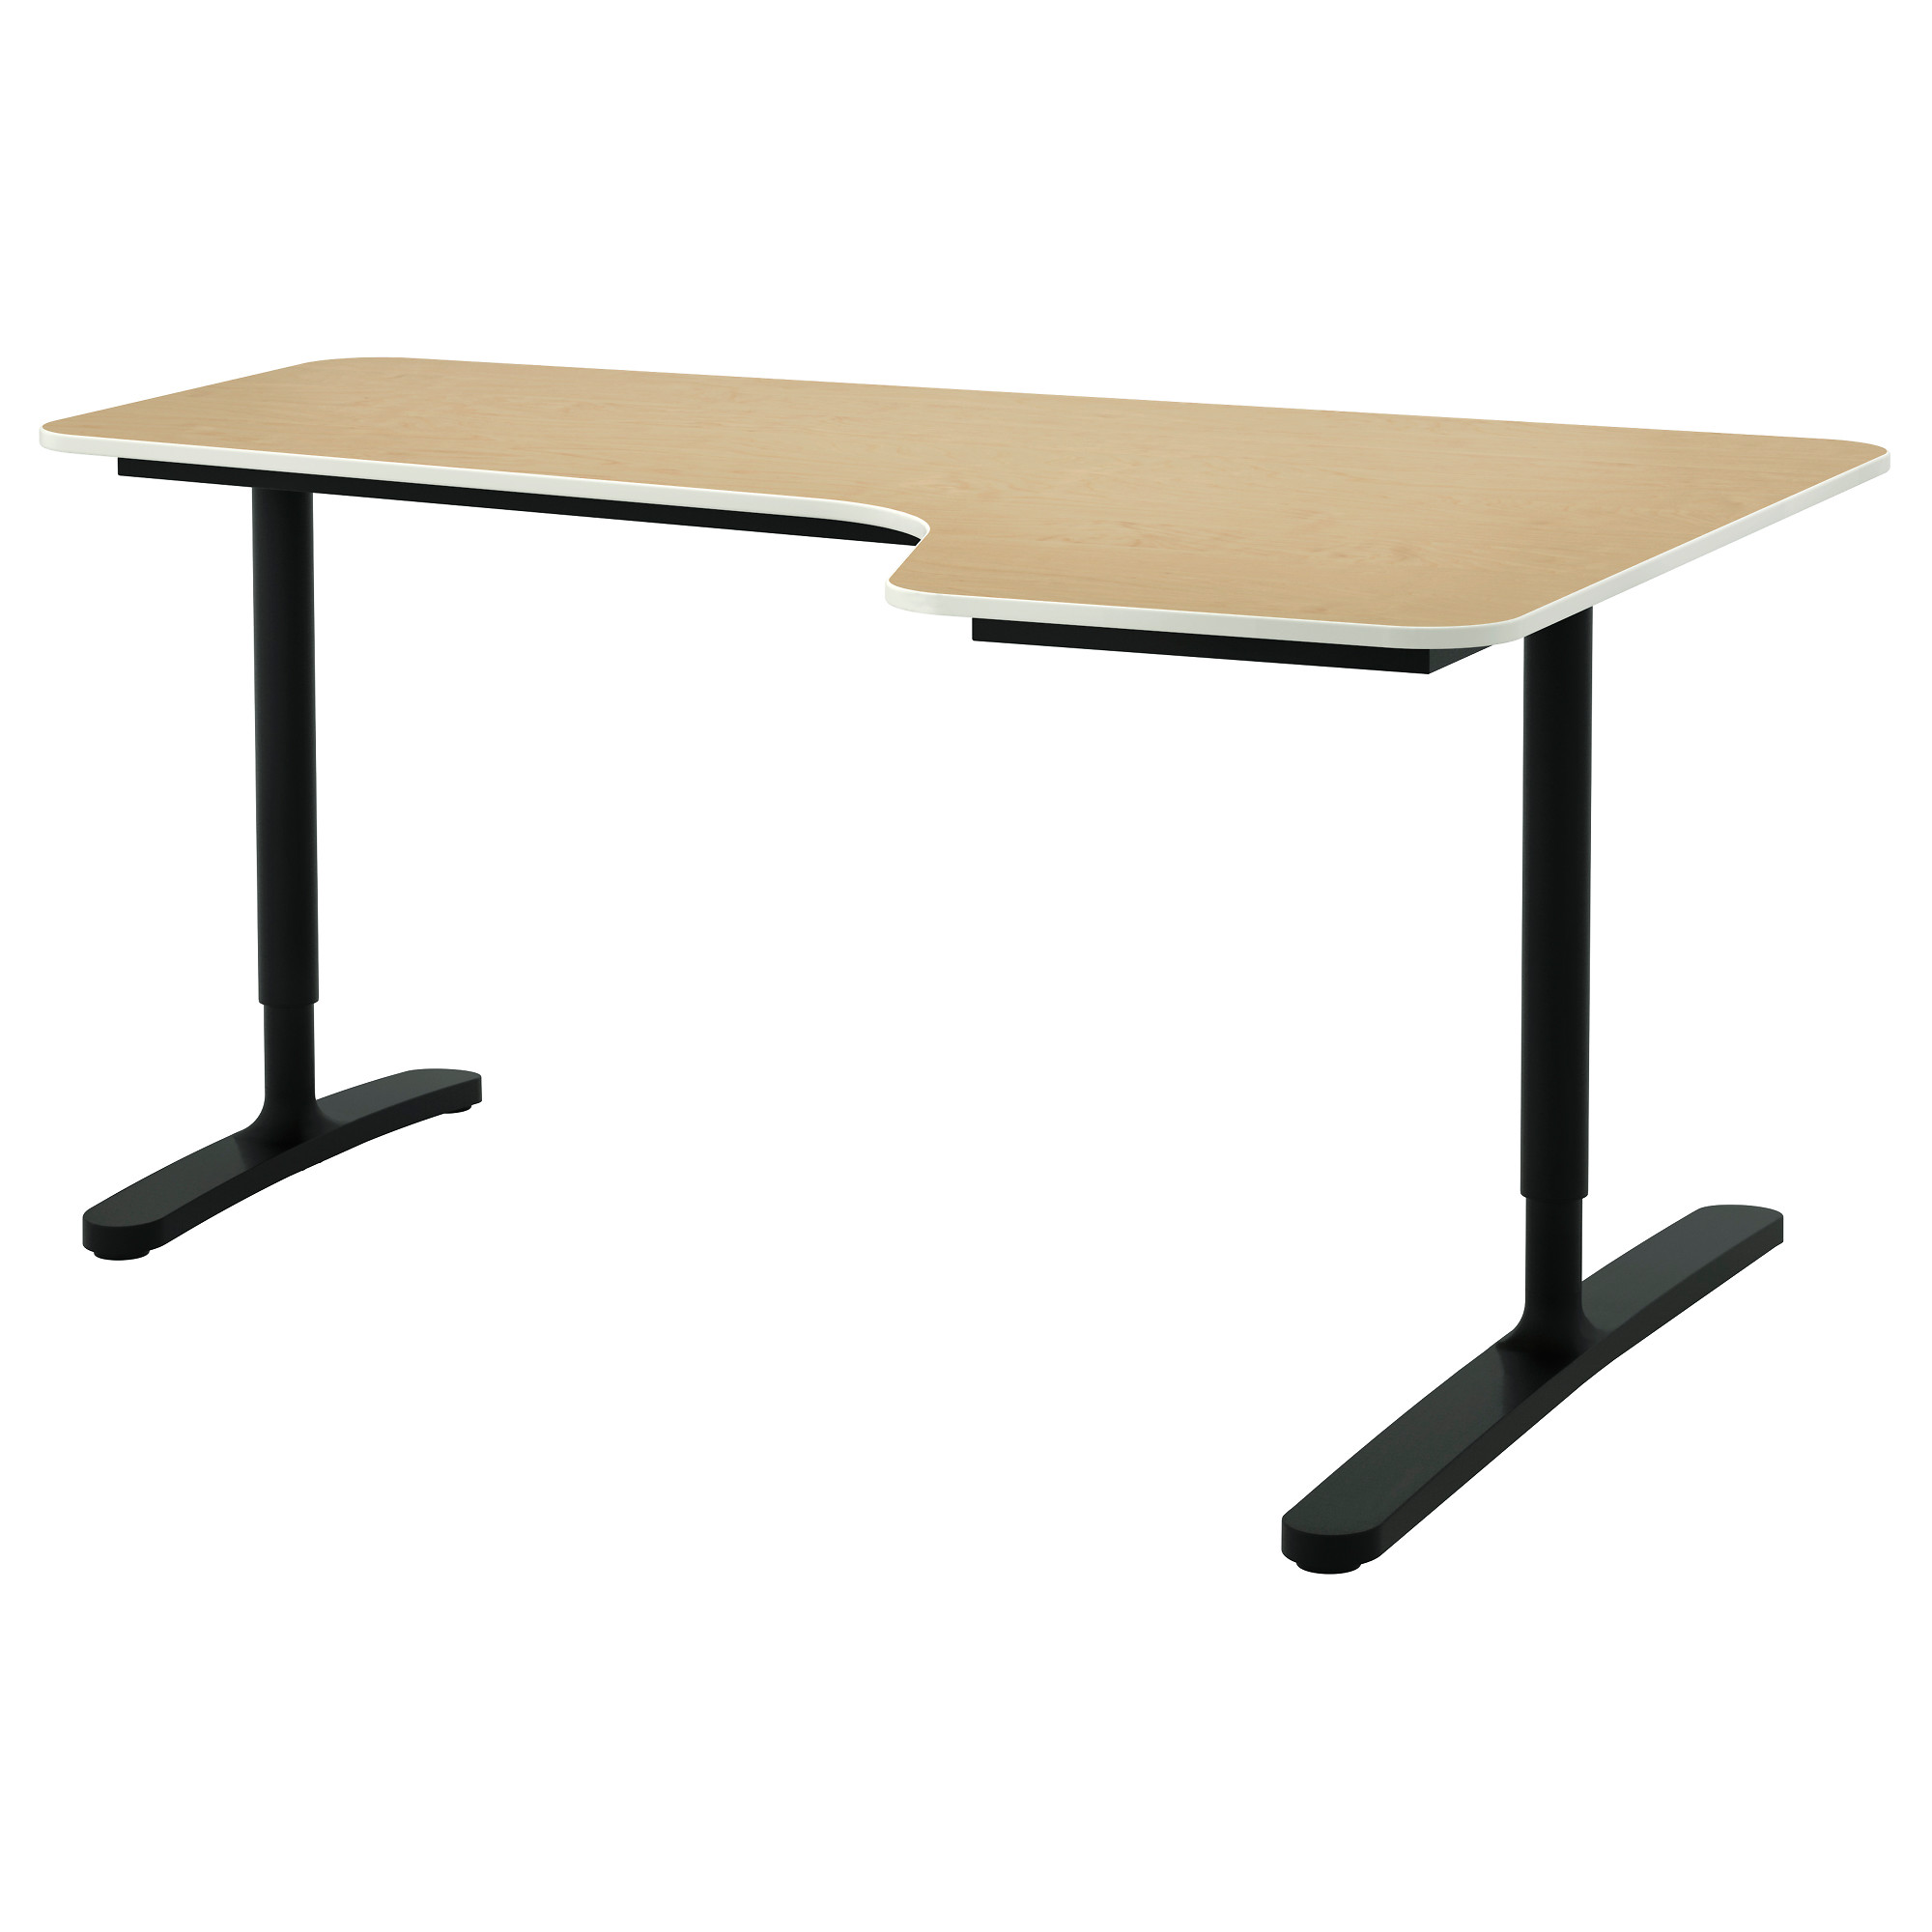 49006411 MOSHULT Office Tables IKEA khmer in phnom penh cambodia